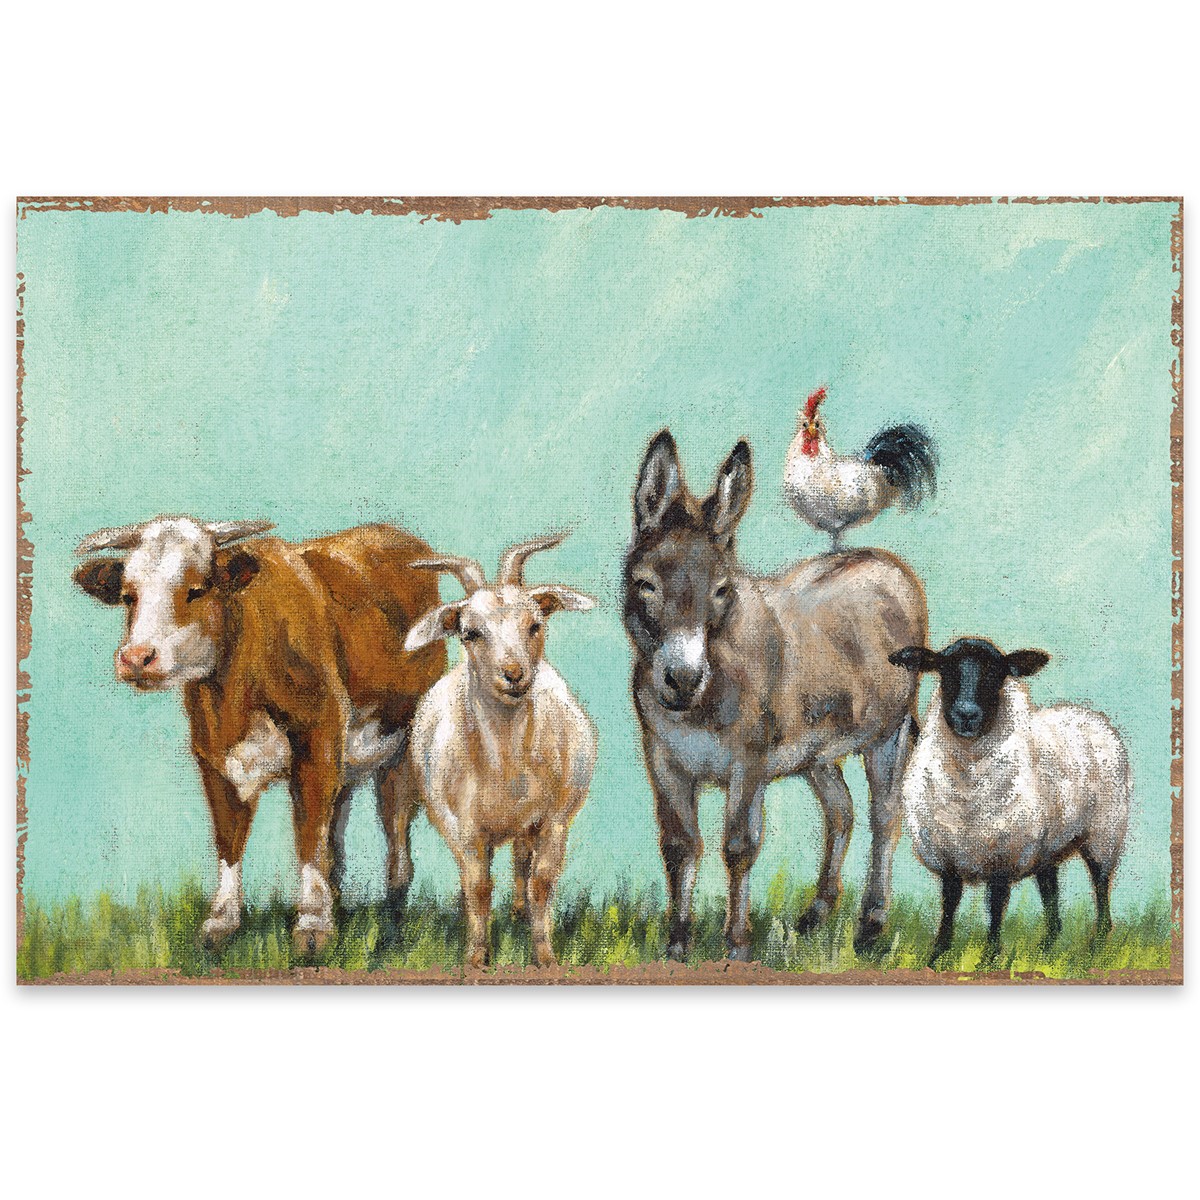 Paper Placemat Pad - Animal Family - 17.50" x 12" - Paper